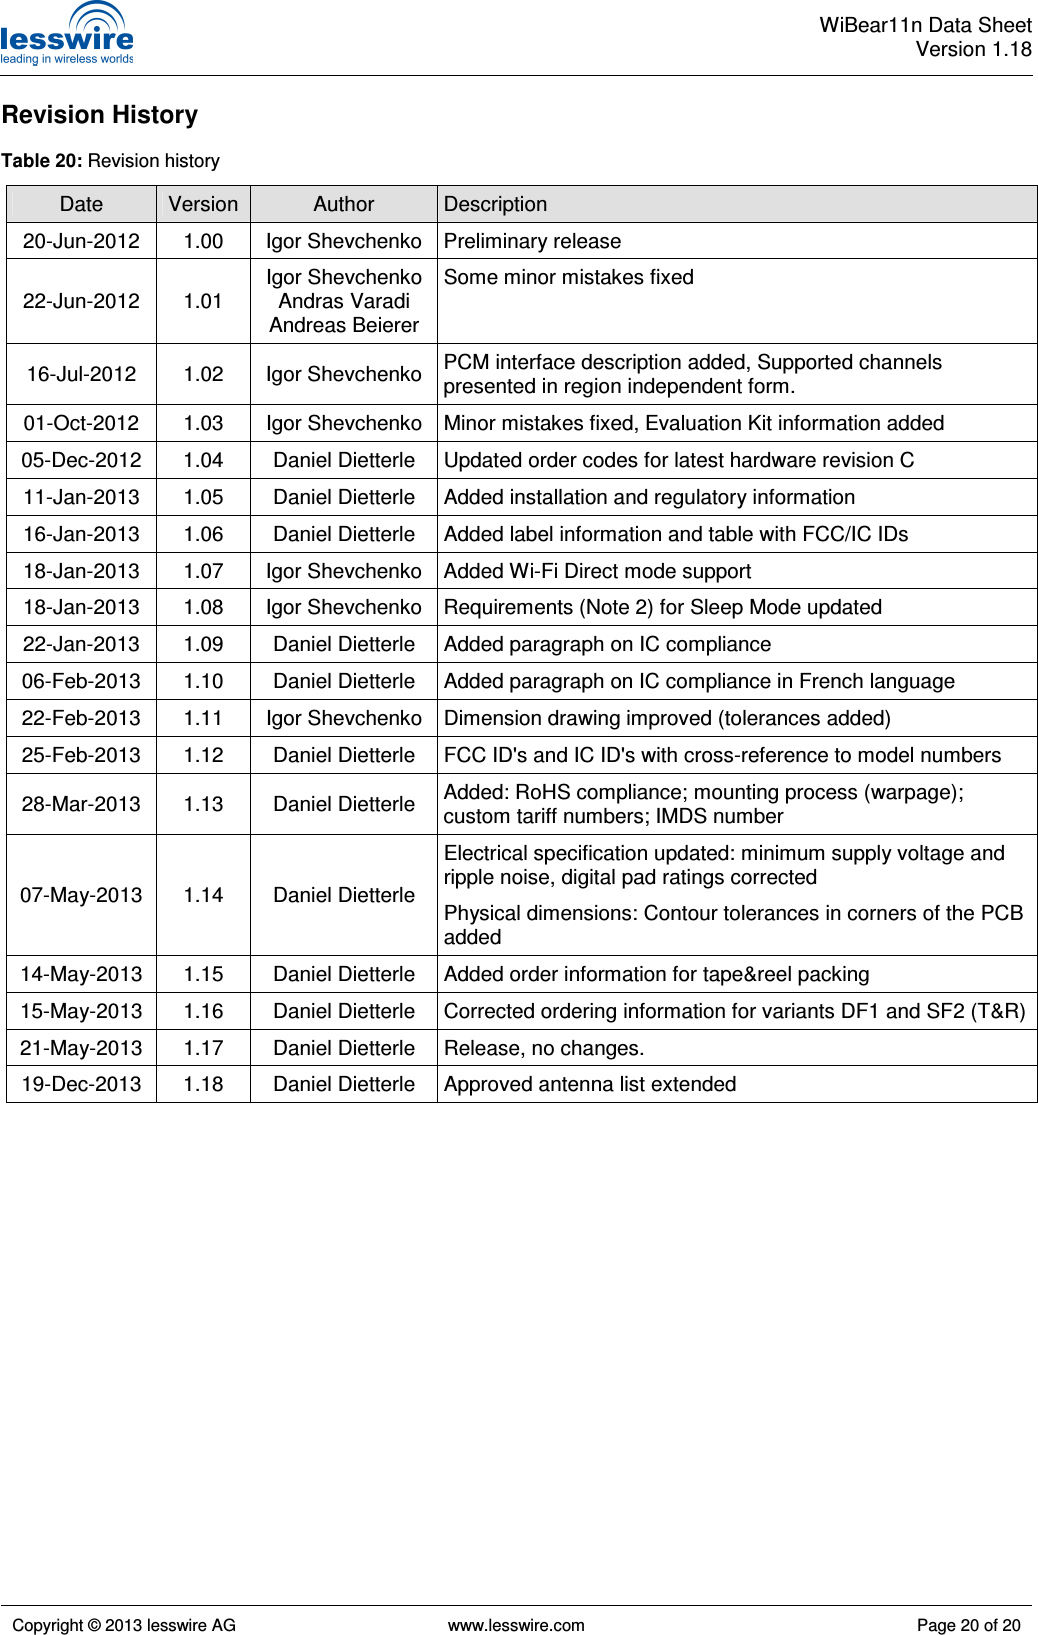  WiBear11n Data SheetVersion 1.18   Copyright © 2013 lesswire AG   www.lesswire.com  Page 20 of 20  Revision History  Table 20: Revision history Date  Version Author  Description 20-Jun-2012  1.00  Igor Shevchenko  Preliminary release 22-Jun-2012  1.01 Igor Shevchenko Andras Varadi Andreas Beierer Some minor mistakes fixed 16-Jul-2012  1.02  Igor Shevchenko  PCM interface description added, Supported channels presented in region independent form.  01-Oct-2012  1.03  Igor Shevchenko  Minor mistakes fixed, Evaluation Kit information added 05-Dec-2012  1.04  Daniel Dietterle  Updated order codes for latest hardware revision C 11-Jan-2013  1.05  Daniel Dietterle  Added installation and regulatory information 16-Jan-2013  1.06  Daniel Dietterle  Added label information and table with FCC/IC IDs 18-Jan-2013  1.07  Igor Shevchenko  Added Wi-Fi Direct mode support 18-Jan-2013  1.08  Igor Shevchenko  Requirements (Note 2) for Sleep Mode updated 22-Jan-2013  1.09  Daniel Dietterle  Added paragraph on IC compliance 06-Feb-2013  1.10  Daniel Dietterle  Added paragraph on IC compliance in French language 22-Feb-2013  1.11  Igor Shevchenko  Dimension drawing improved (tolerances added) 25-Feb-2013  1.12  Daniel Dietterle  FCC ID&apos;s and IC ID&apos;s with cross-reference to model numbers 28-Mar-2013  1.13  Daniel Dietterle  Added: RoHS compliance; mounting process (warpage); custom tariff numbers; IMDS number 07-May-2013  1.14  Daniel Dietterle Electrical specification updated: minimum supply voltage and ripple noise, digital pad ratings corrected Physical dimensions: Contour tolerances in corners of the PCB added 14-May-2013  1.15  Daniel Dietterle  Added order information for tape&amp;reel packing 15-May-2013  1.16  Daniel Dietterle  Corrected ordering information for variants DF1 and SF2 (T&amp;R) 21-May-2013  1.17  Daniel Dietterle  Release, no changes. 19-Dec-2013  1.18  Daniel Dietterle  Approved antenna list extended  